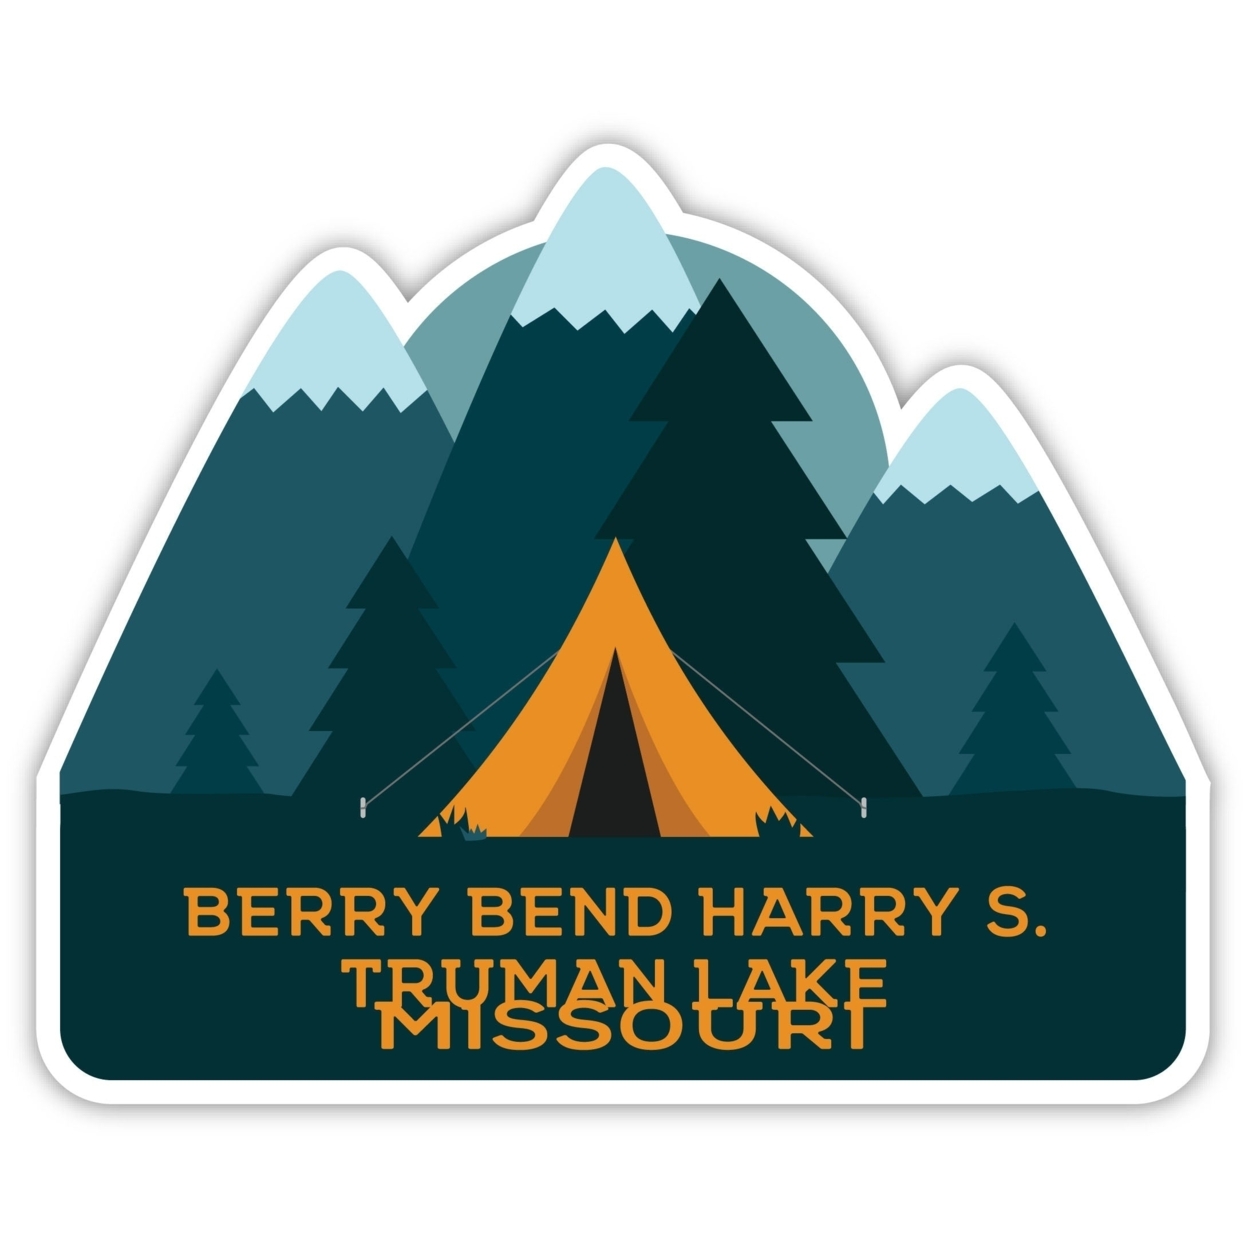 Berry Bend Harry S. Truman Lake Missouri Souvenir Decorative Stickers (Choose Theme And Size) - 4-Pack, 4-Inch, Tent